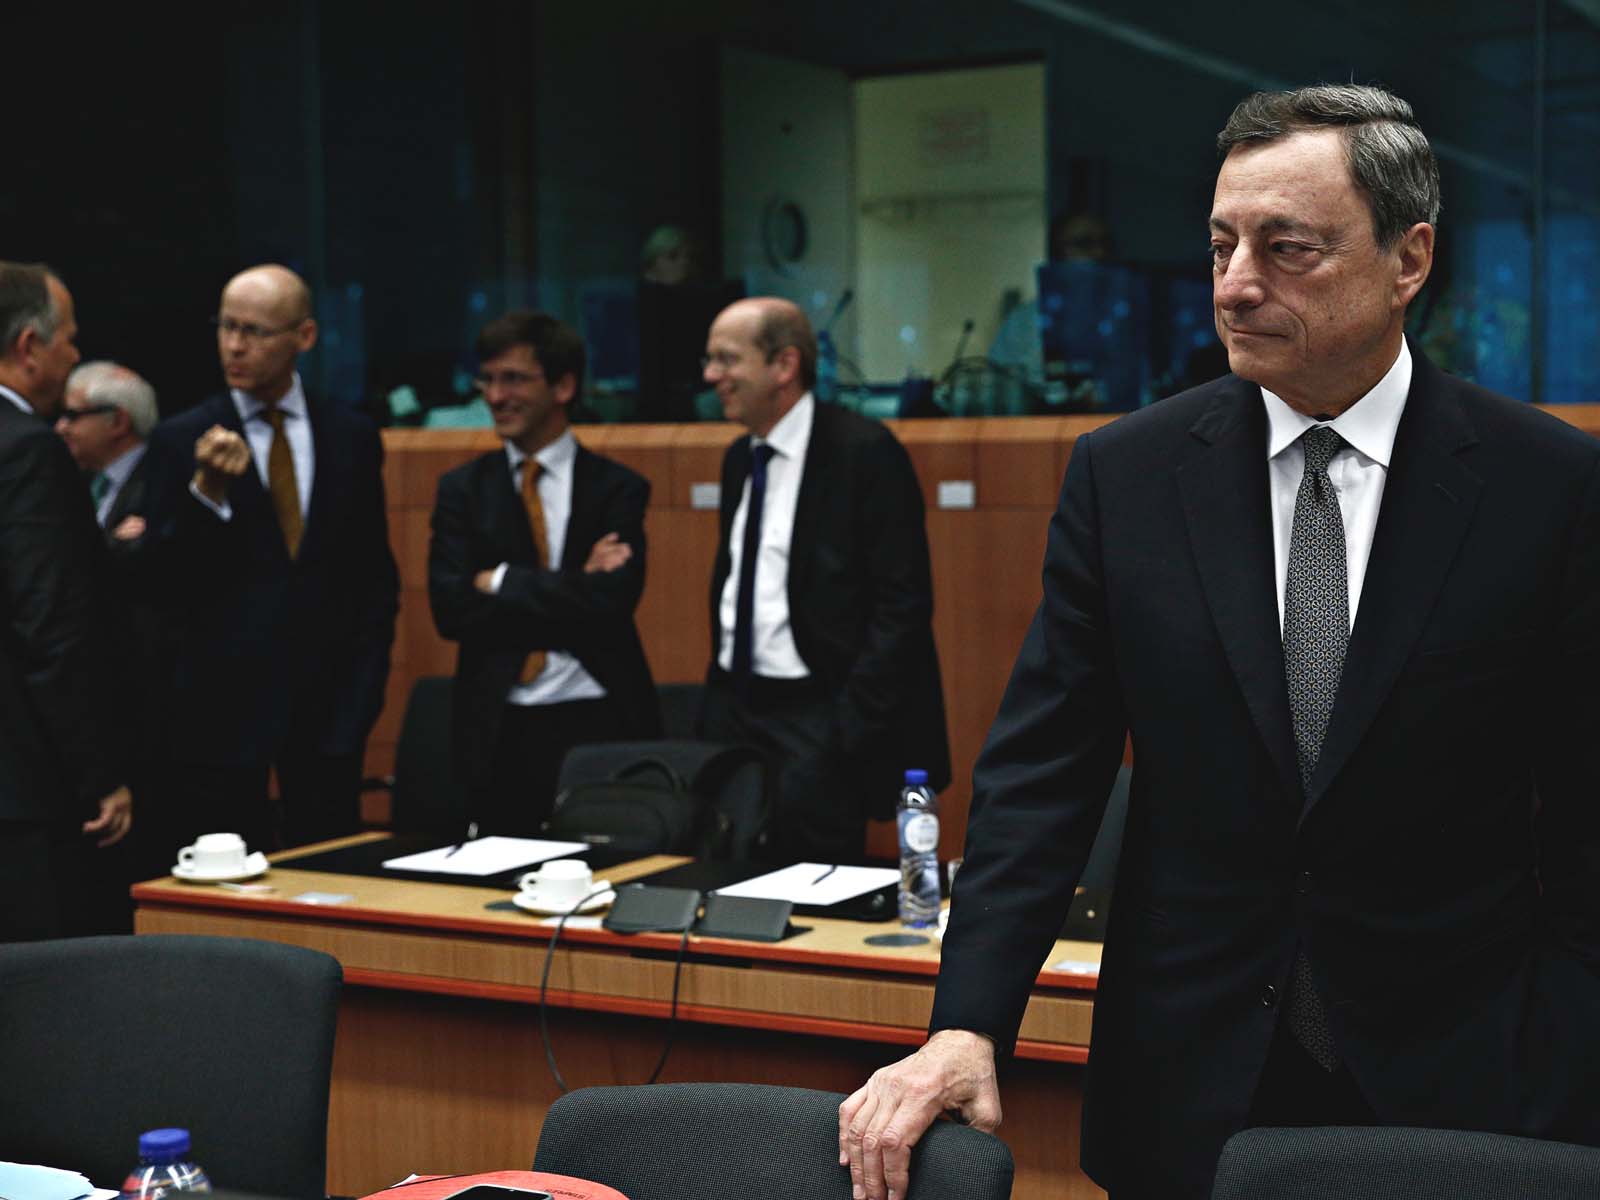 Mario Draghi Leaves European Central Bank Without Ever Raising Interest Rates